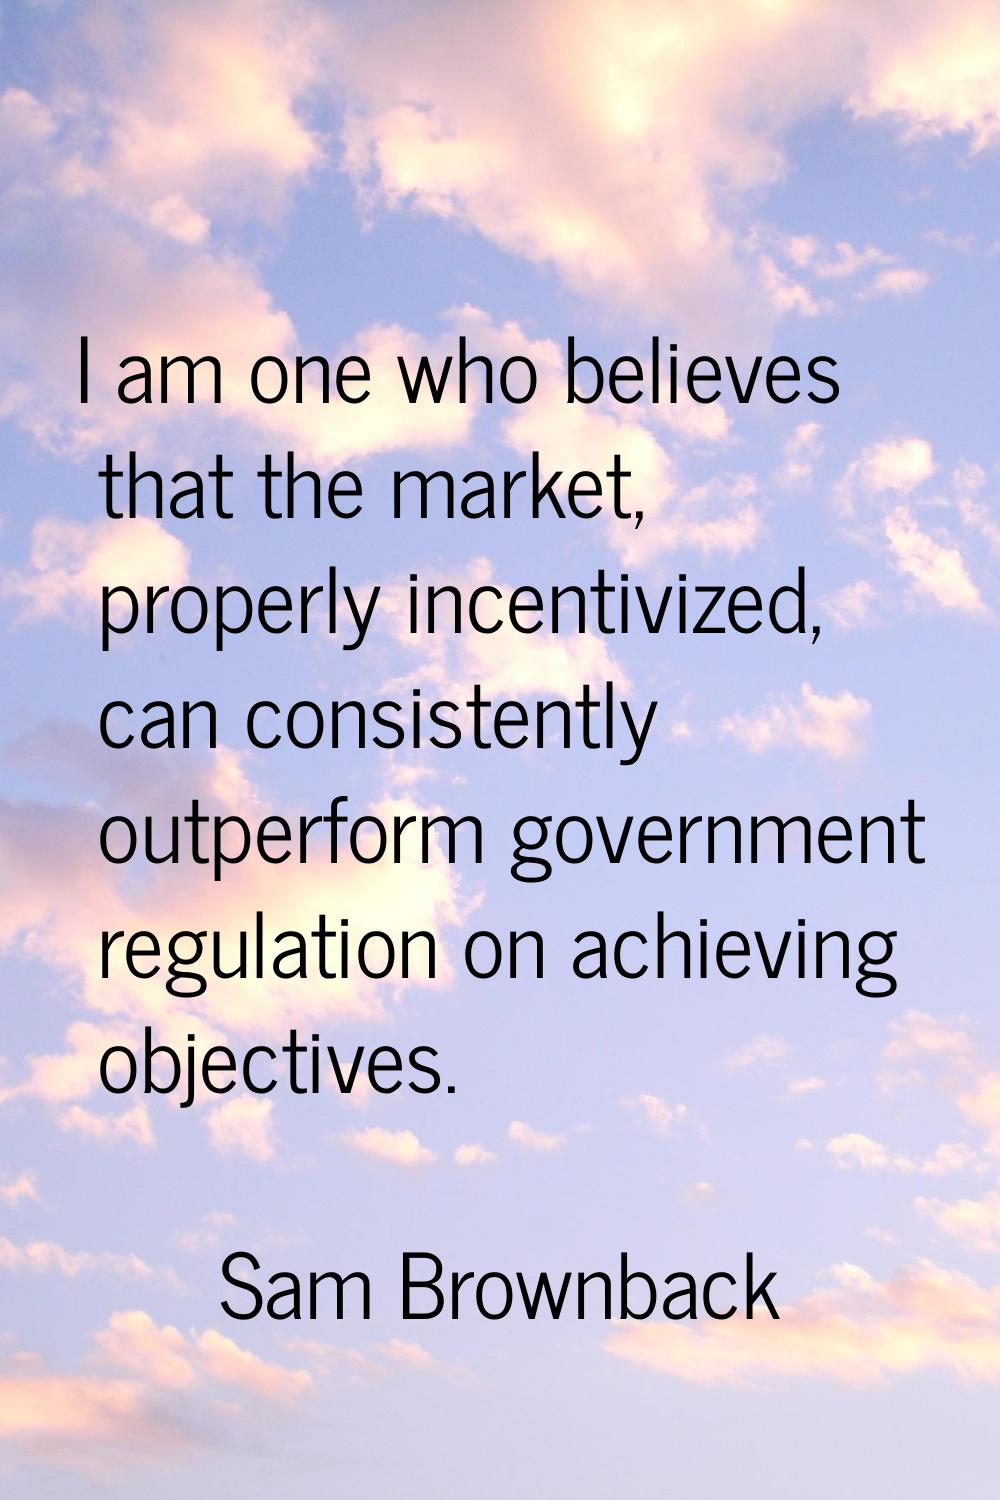 I am one who believes that the market, properly incentivized, can consistently outperform governmen